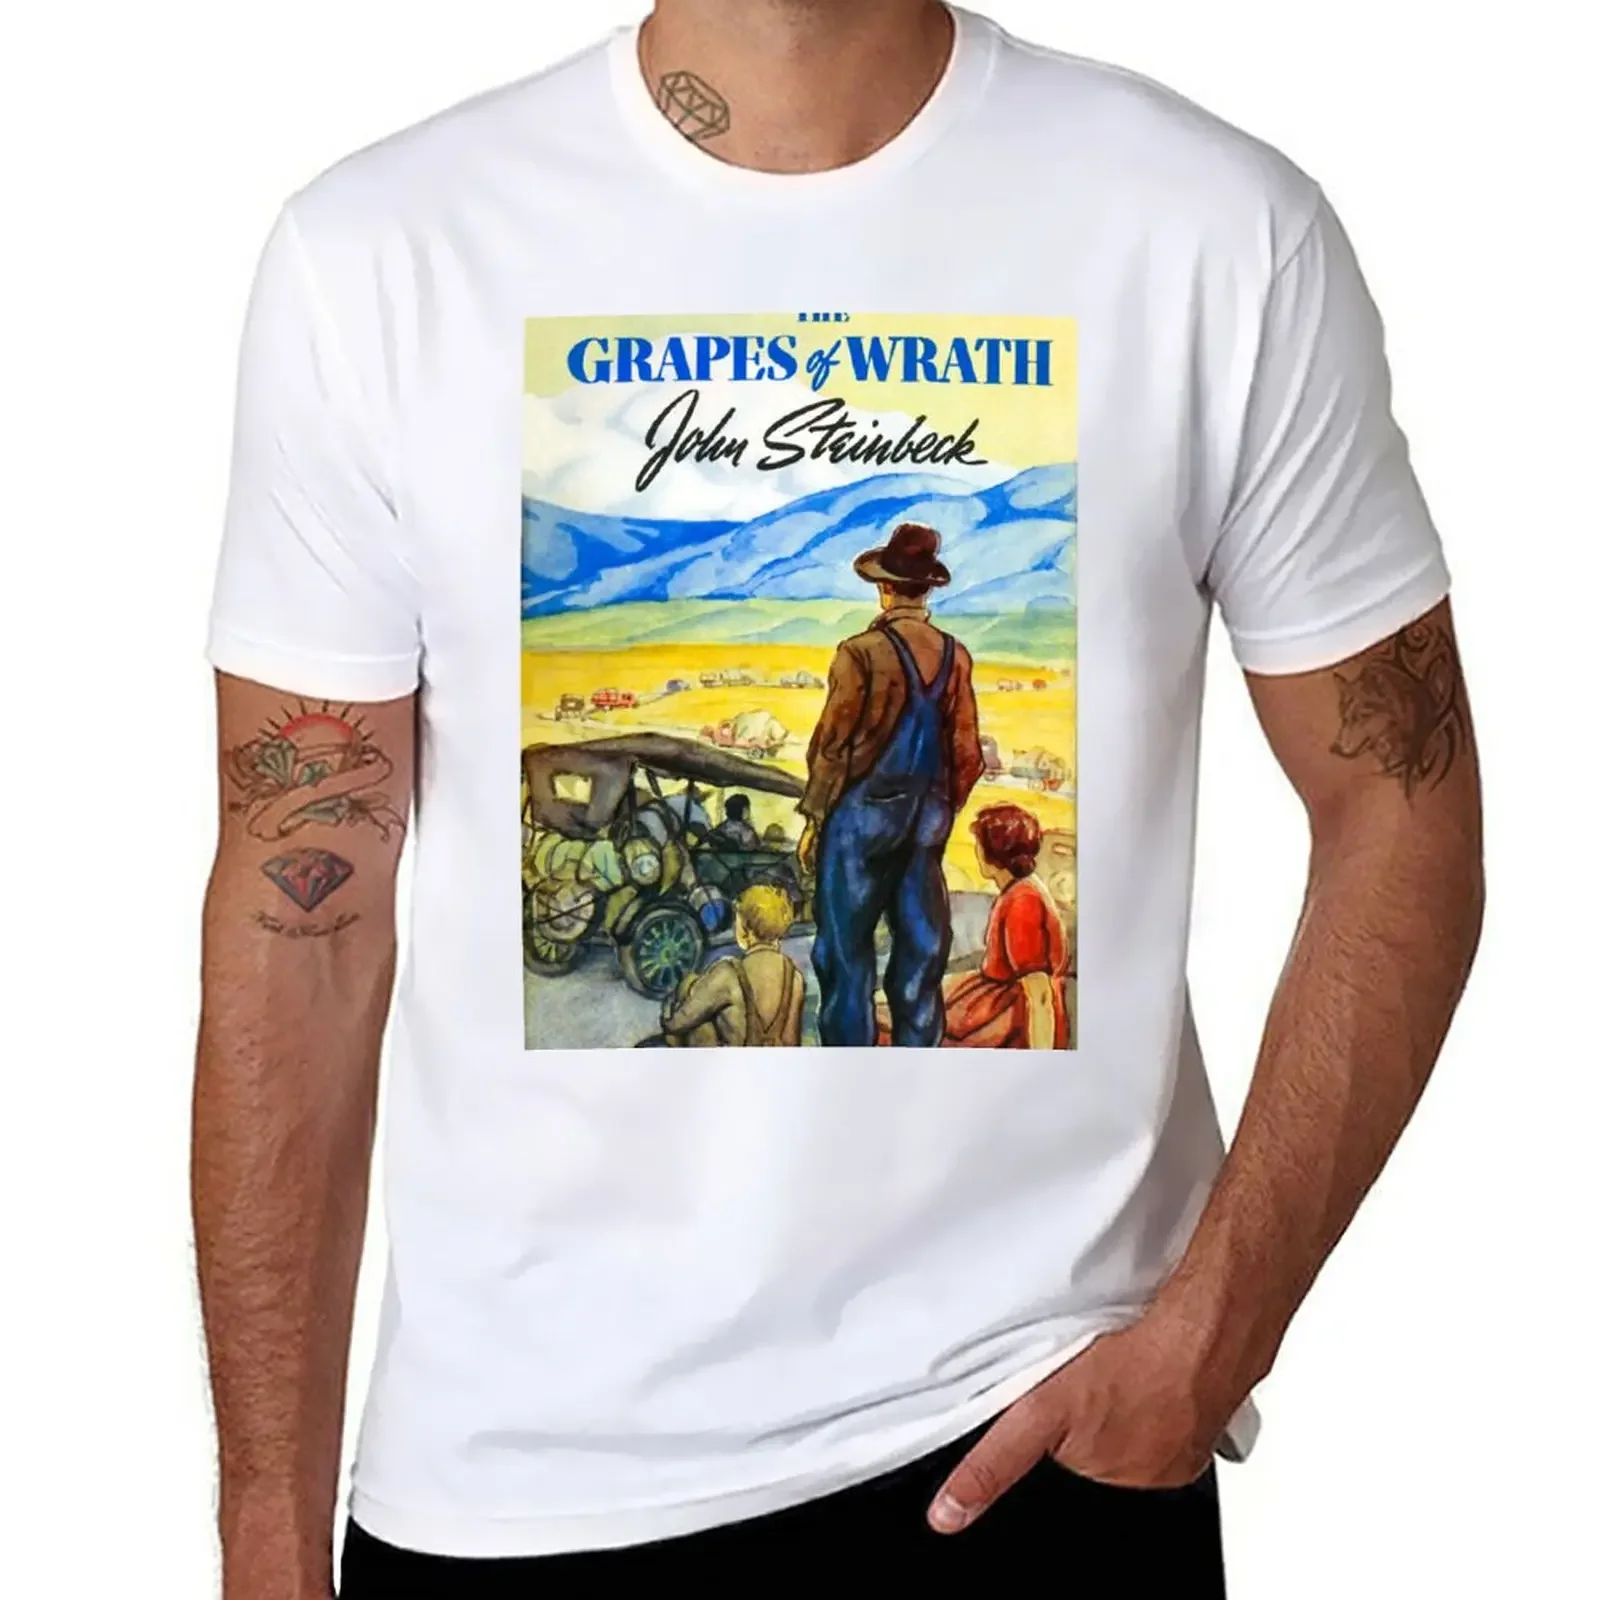 

The Grapes of Wrath 1939 First Edition Cover, John Steinbeck T-Shirt vintage clothes Short sleeve tee black t-shirts for men